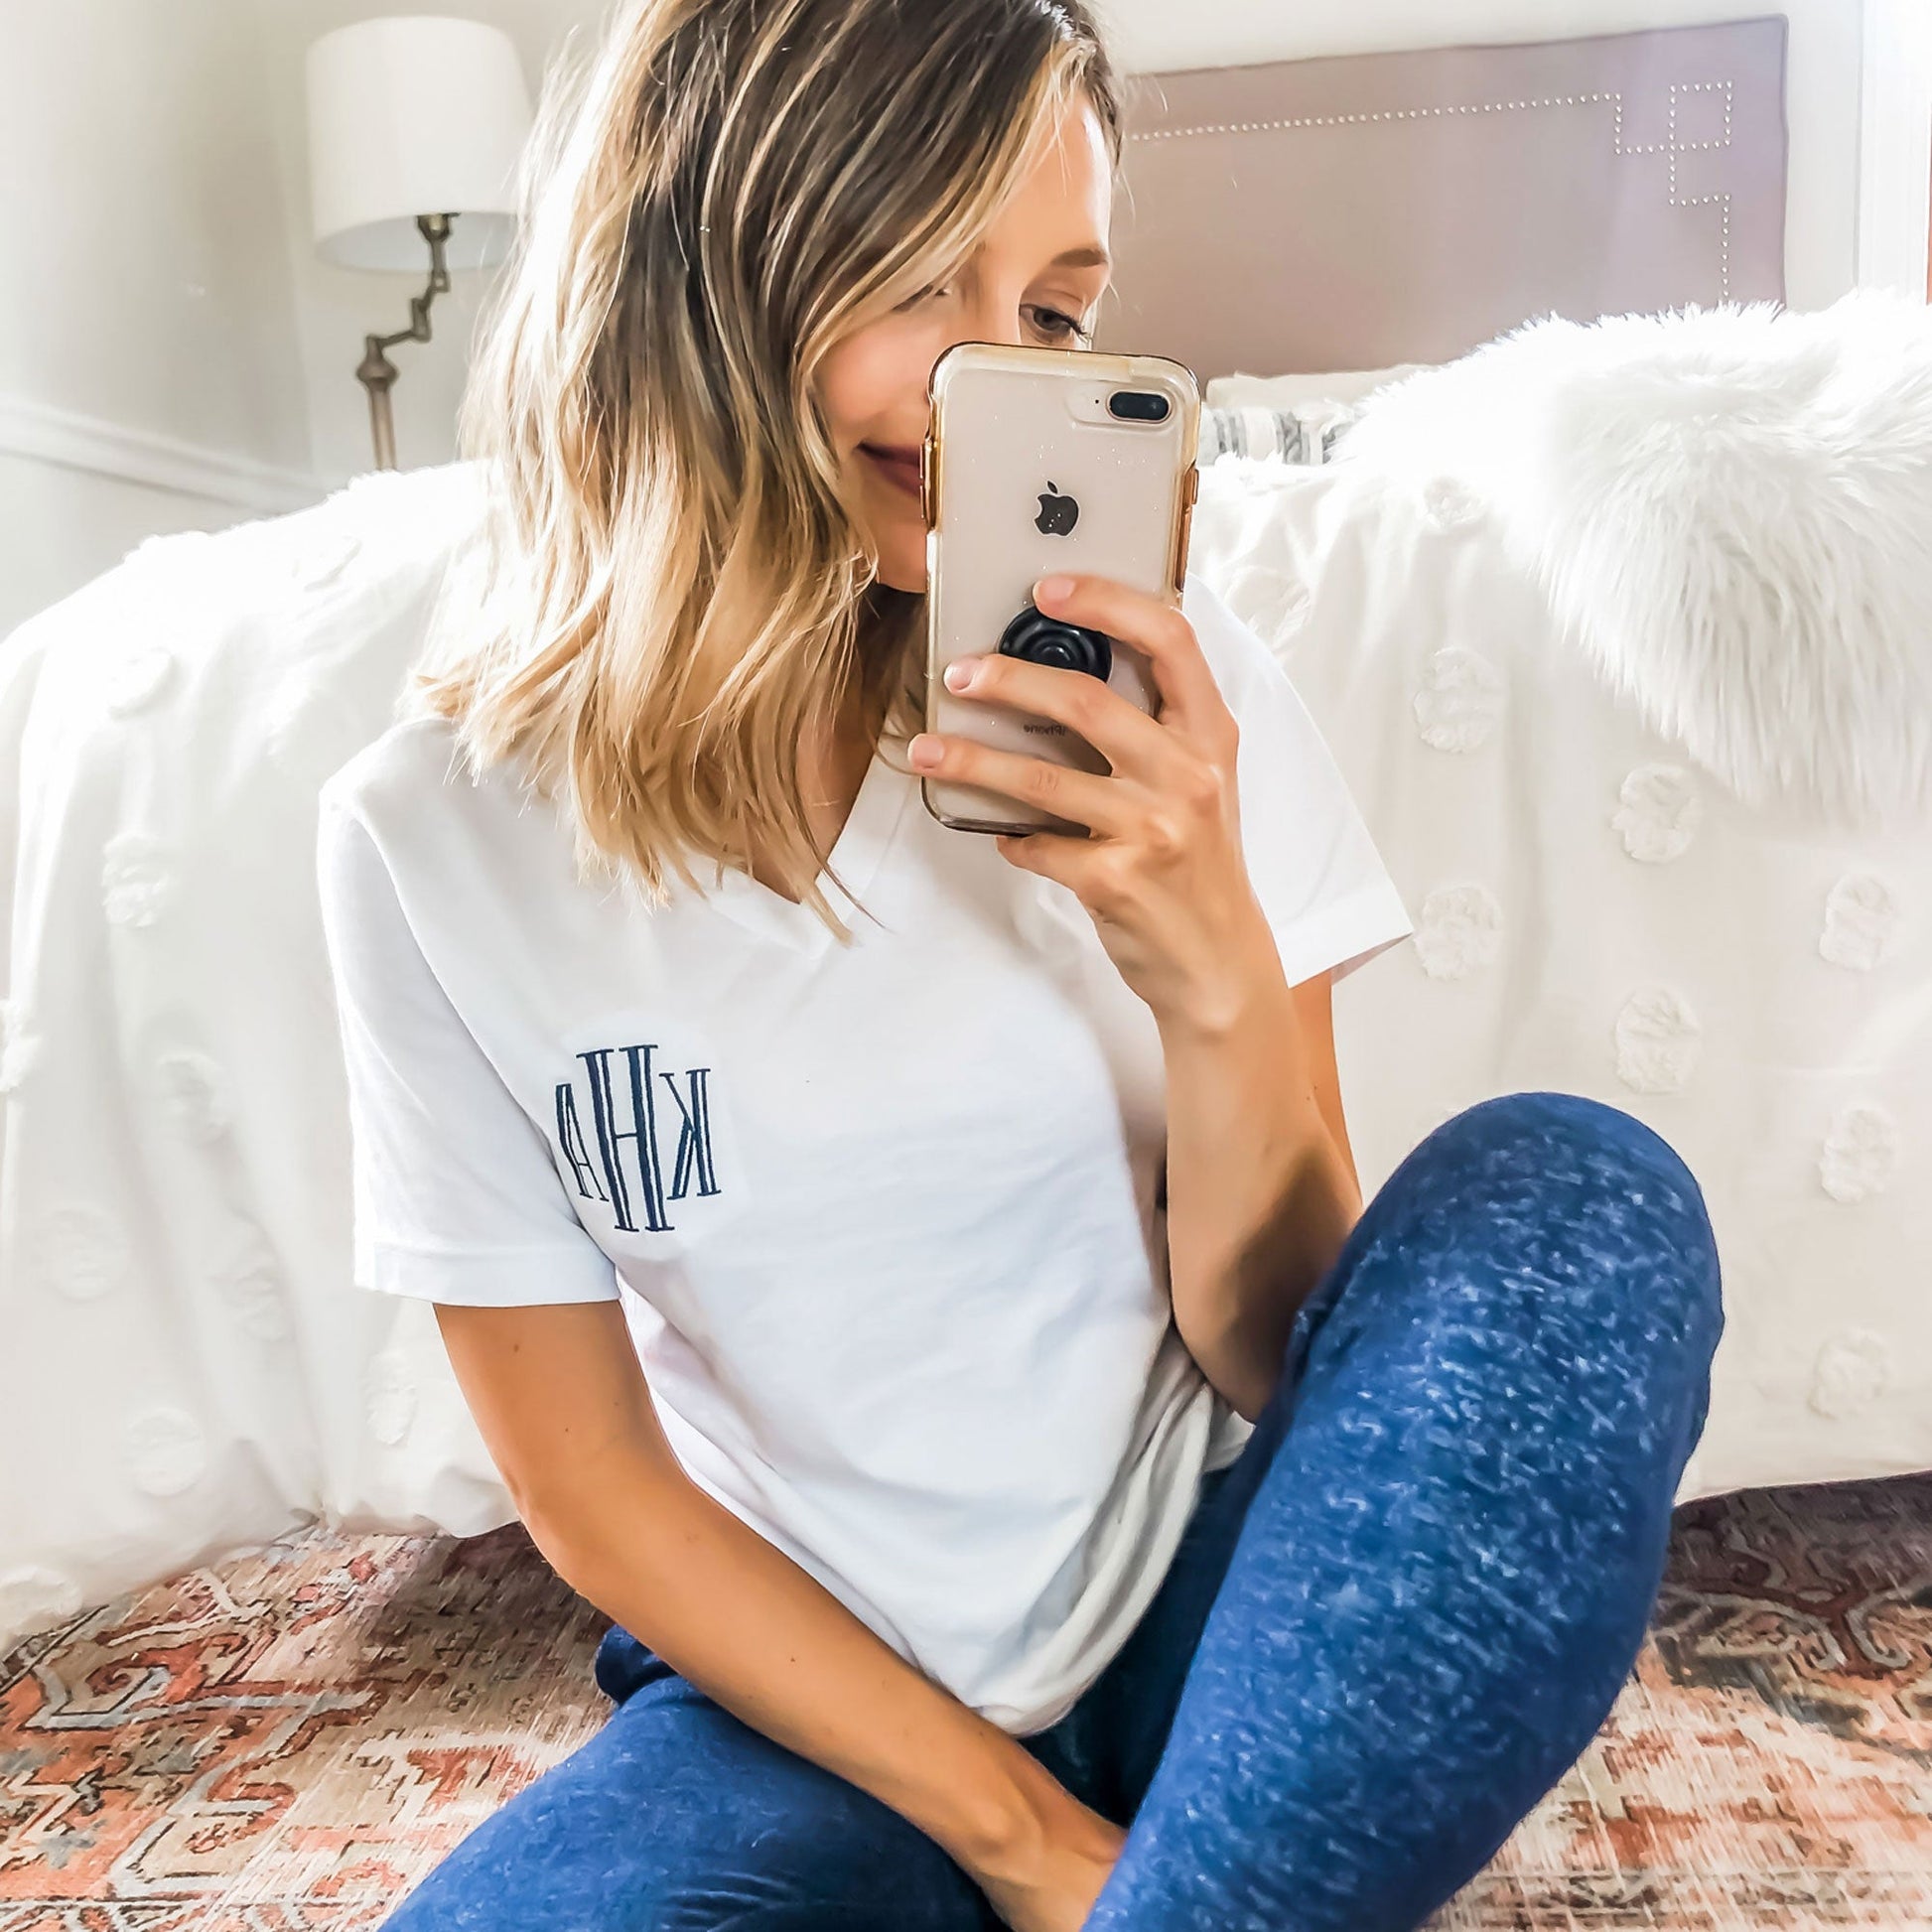 girl taking a selfie in the mirror wearing navy pj pants and a white short sleeved vneck top with custom three letter monogram embroidery in navy thread